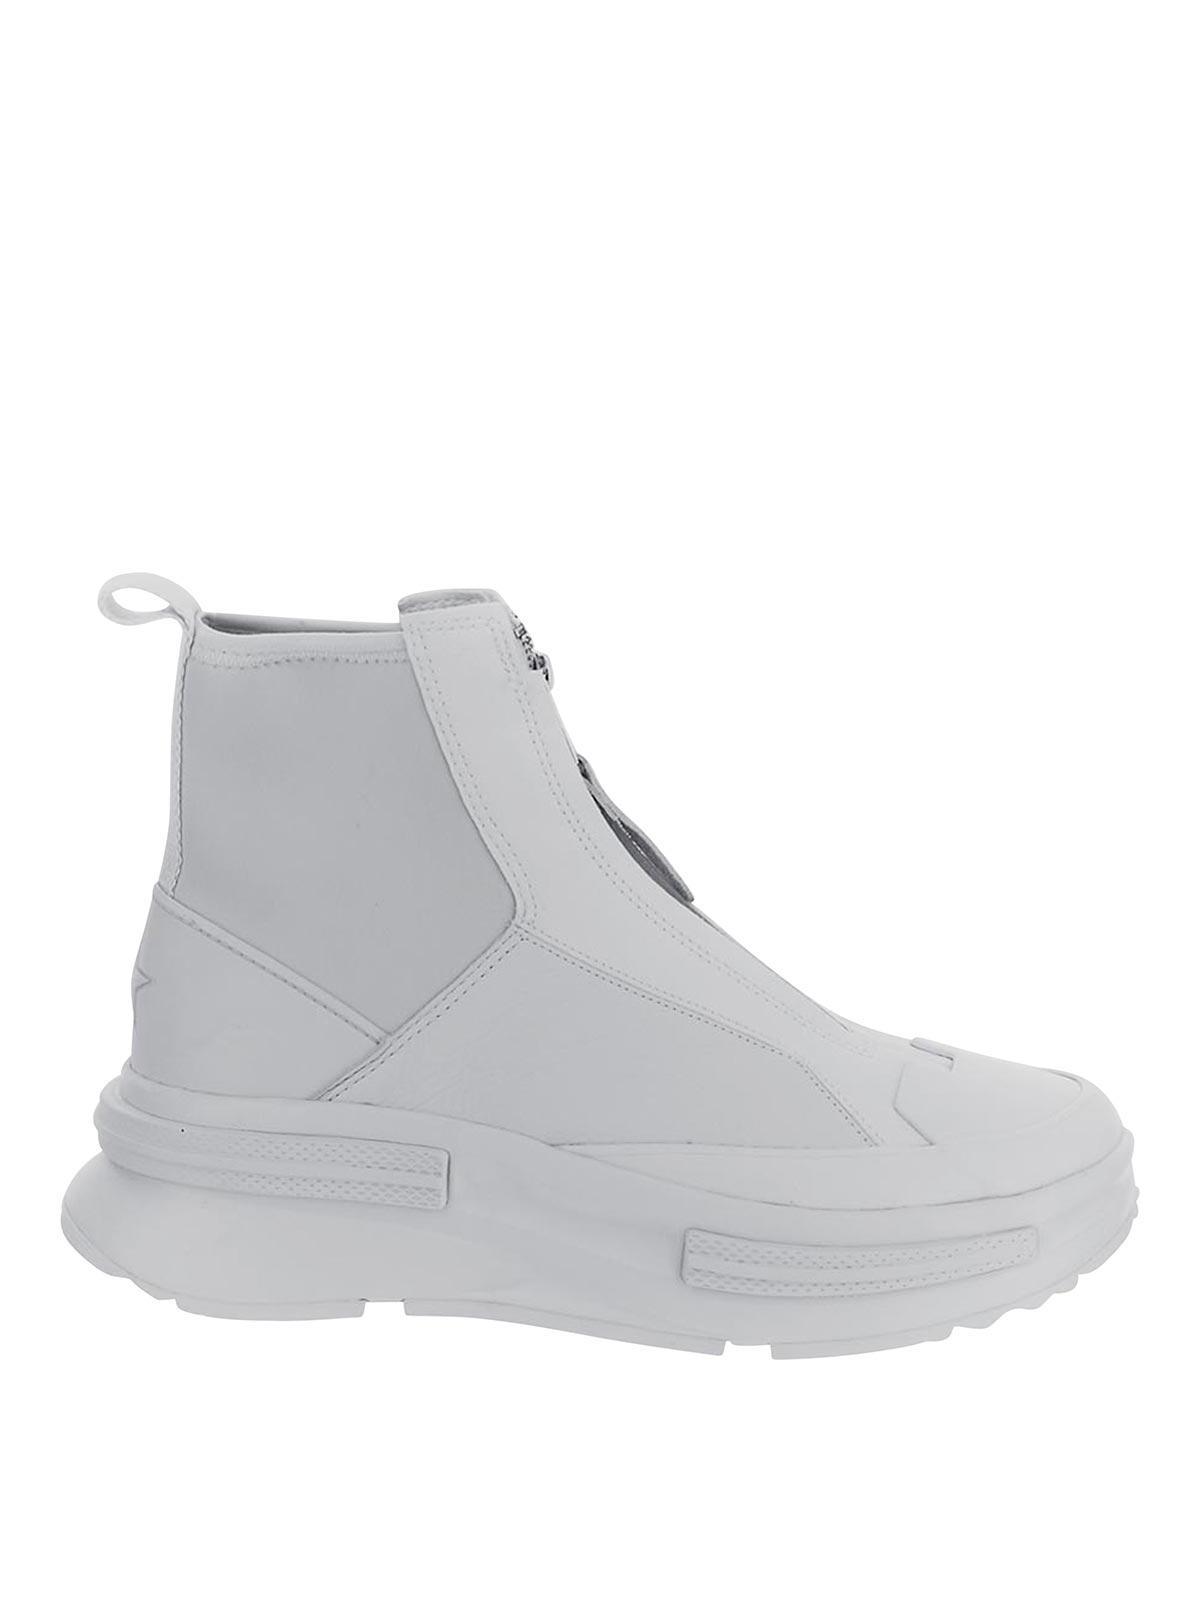 Converse High Top Sneakers In White